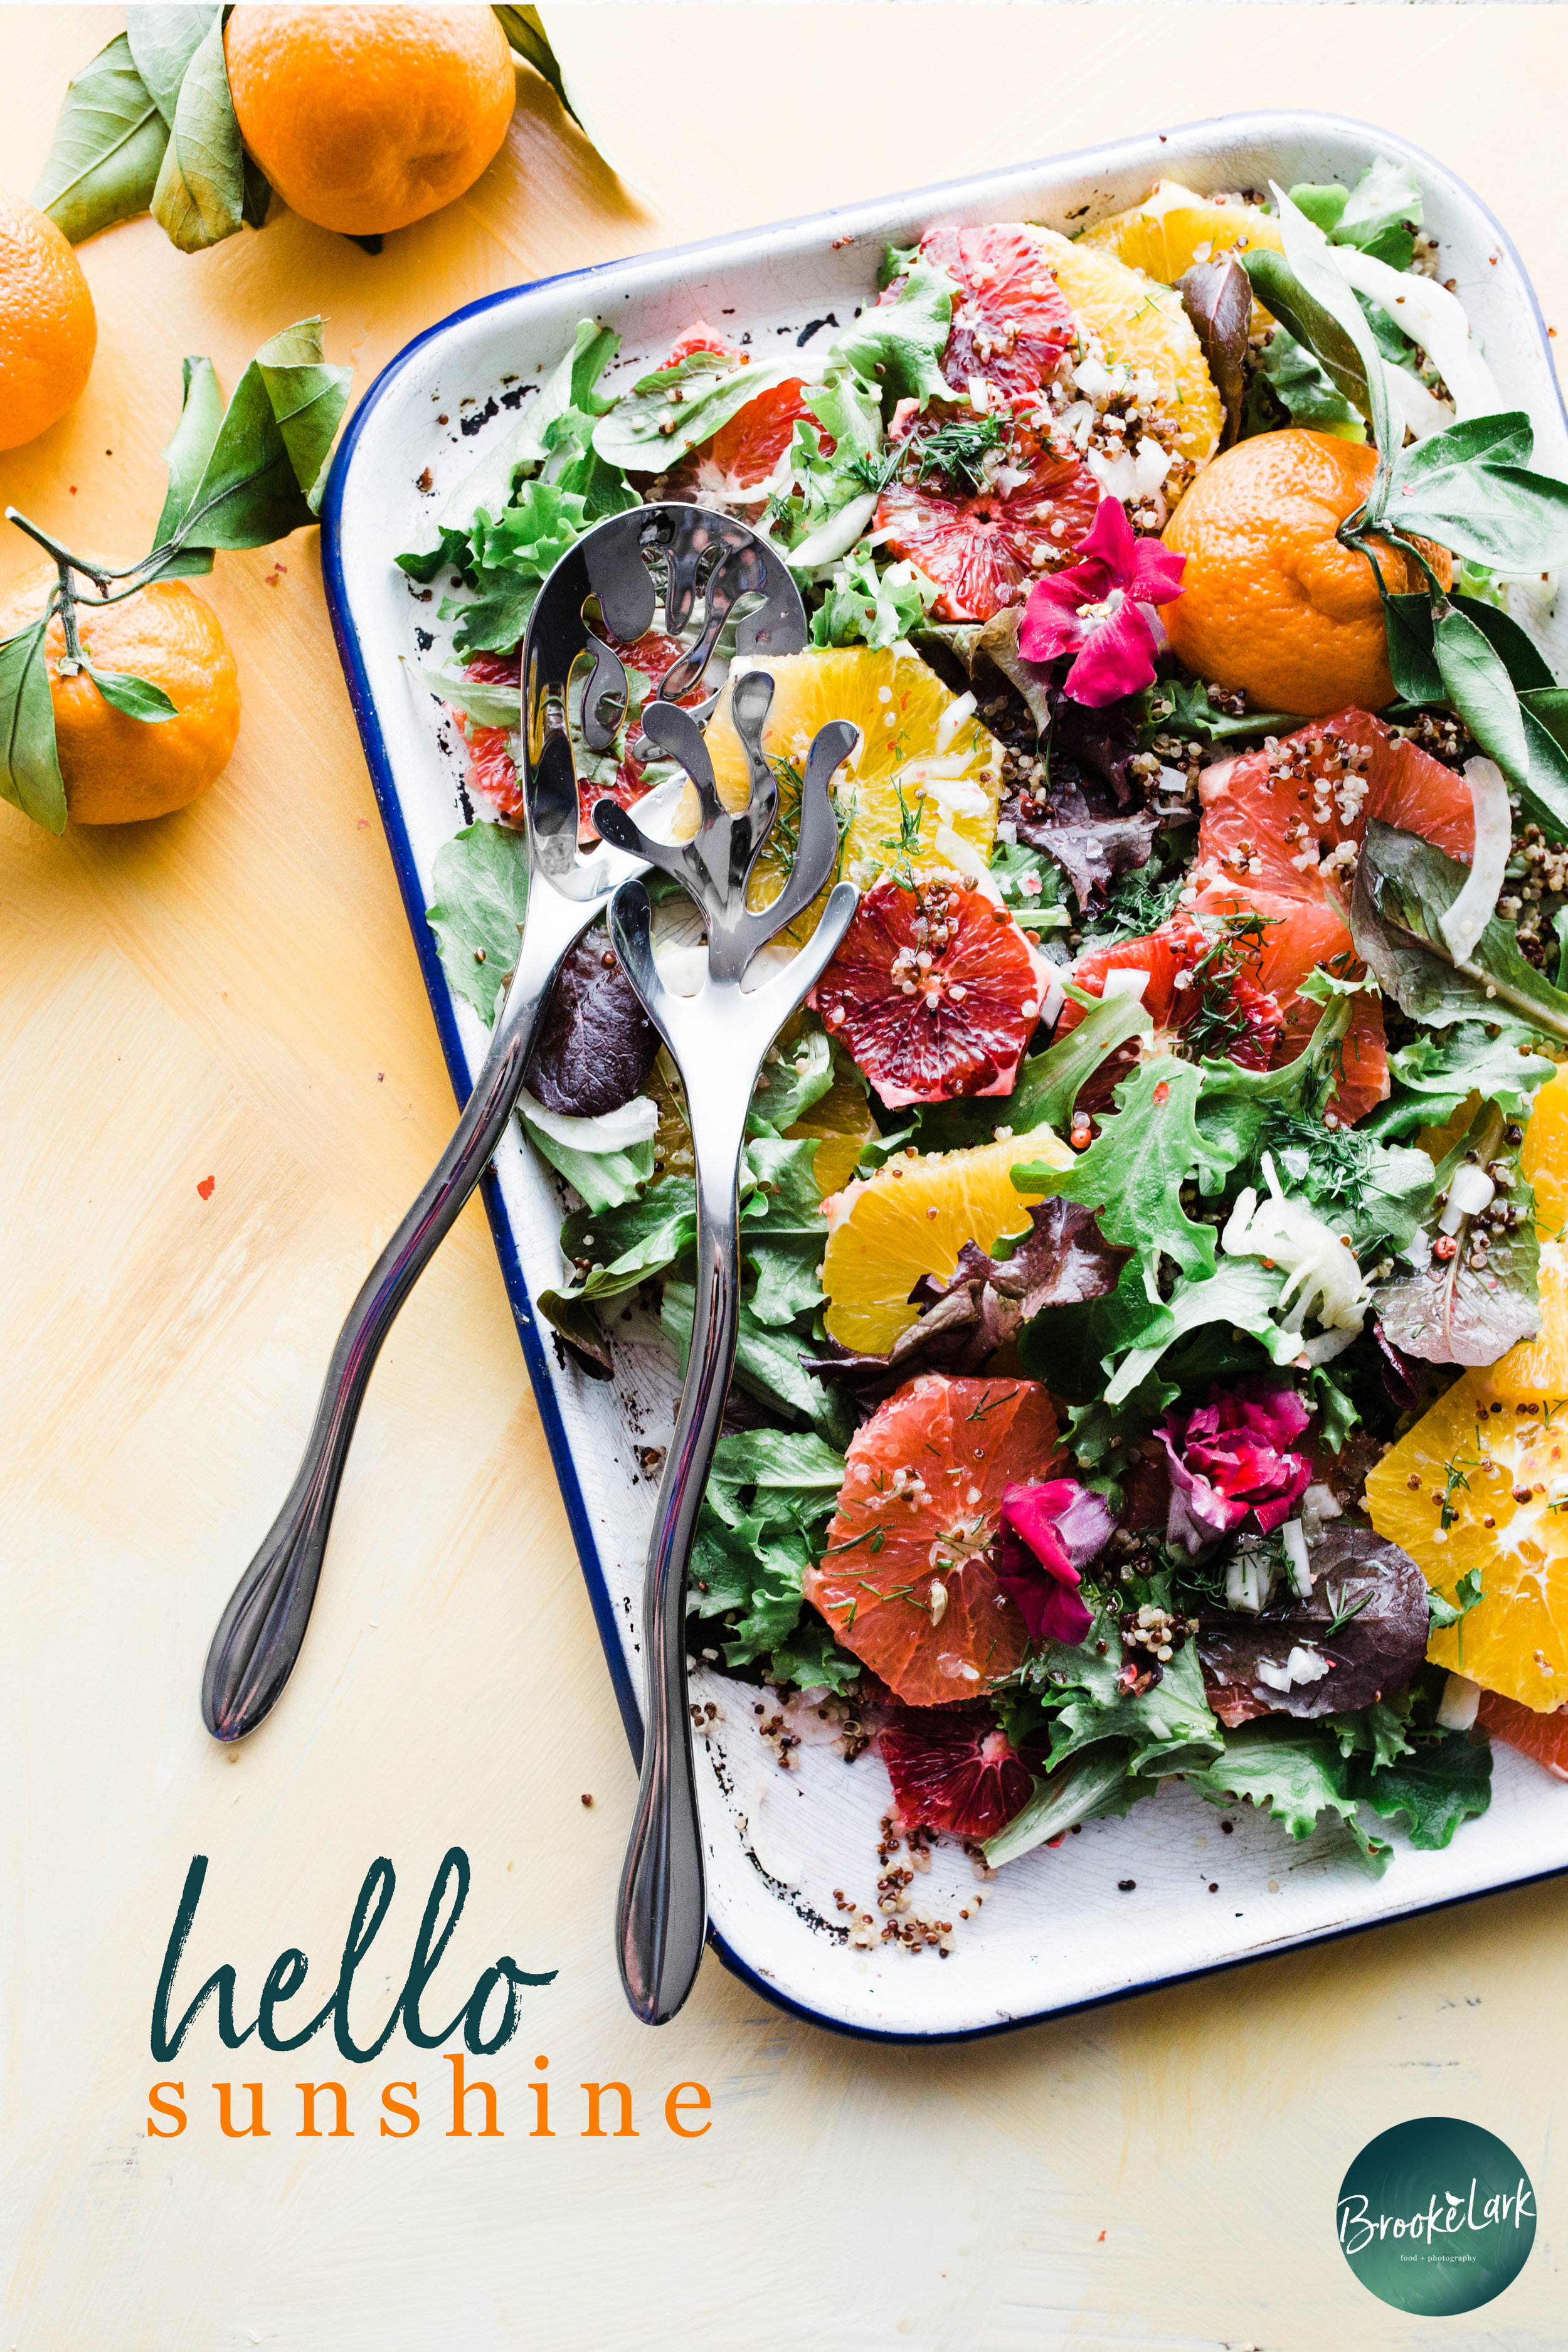 https://images.squarespace-cdn.com/content/v1/56359eace4b00b97e61fa83b/1517097448336-9HQ05BNZFOQ5NPI09AHL/Sunshine+Quinoa+Citrus+Salad+%28Vegan%2C+Vegetarian%2C+Splendid%29++%7C+Beautiful+winter+citrus+is+tossed+with+quinoa+and+tangy+spring+greens+in+this+simple+salad%2C+which+practically+makes+it%27s+own+vinaigrette%21+The+flavors+here+are+simple+and+splendid.+A+perfect+dish+for+lazy+lunches.+A+great+way+to+enjoy+more+real+food%2C+in+a+naturally+delicious+way.